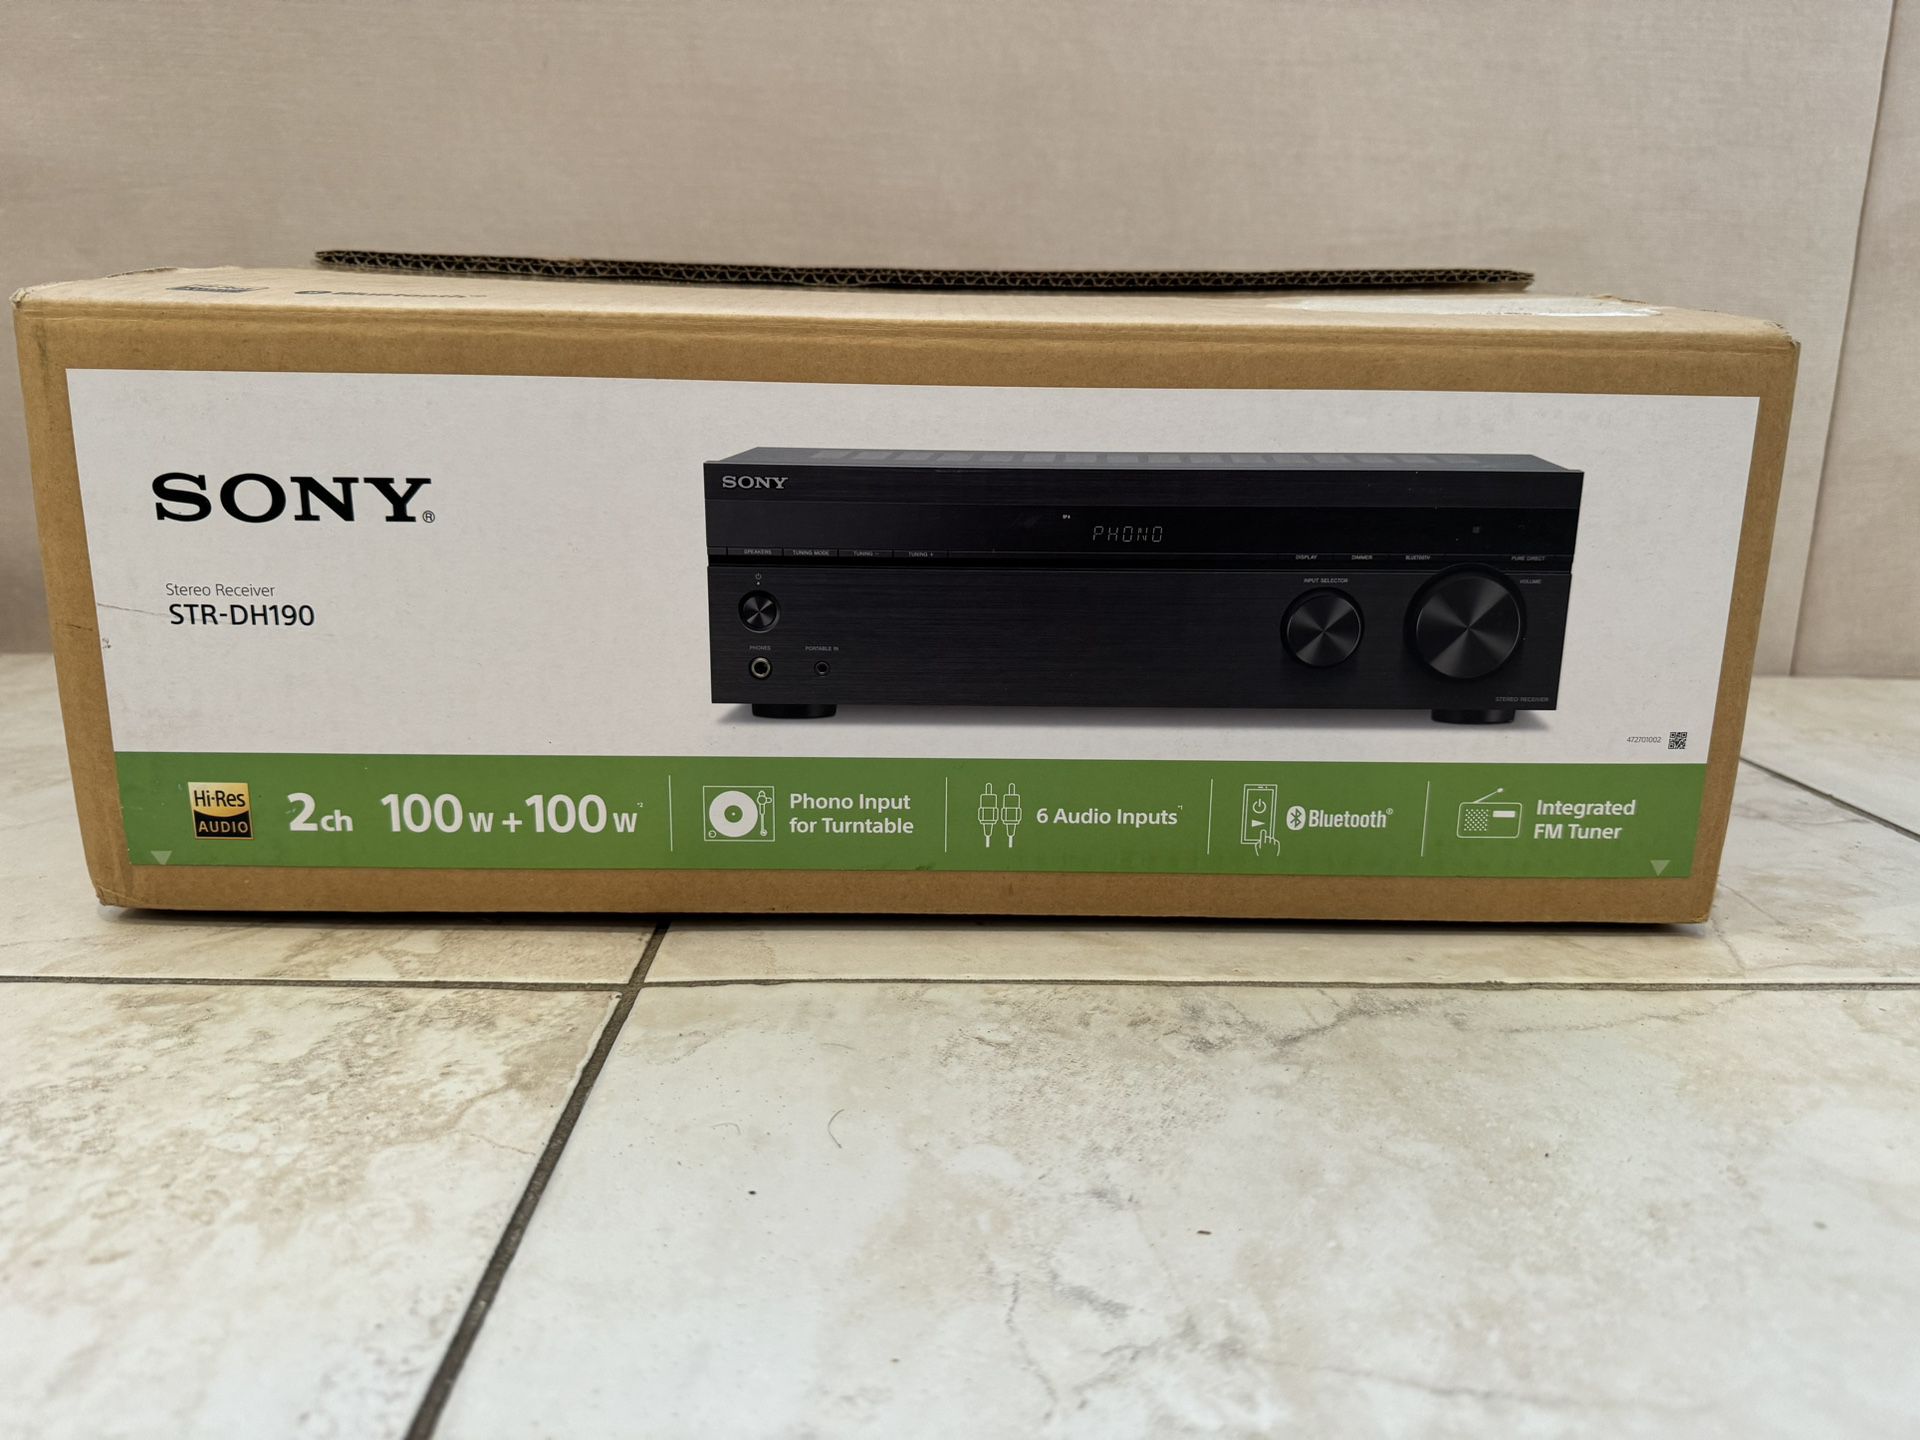 Sony - STRDH190-2-Ch. Stereo Receiver with Bluetooth & Phono Input for Turntables - Black